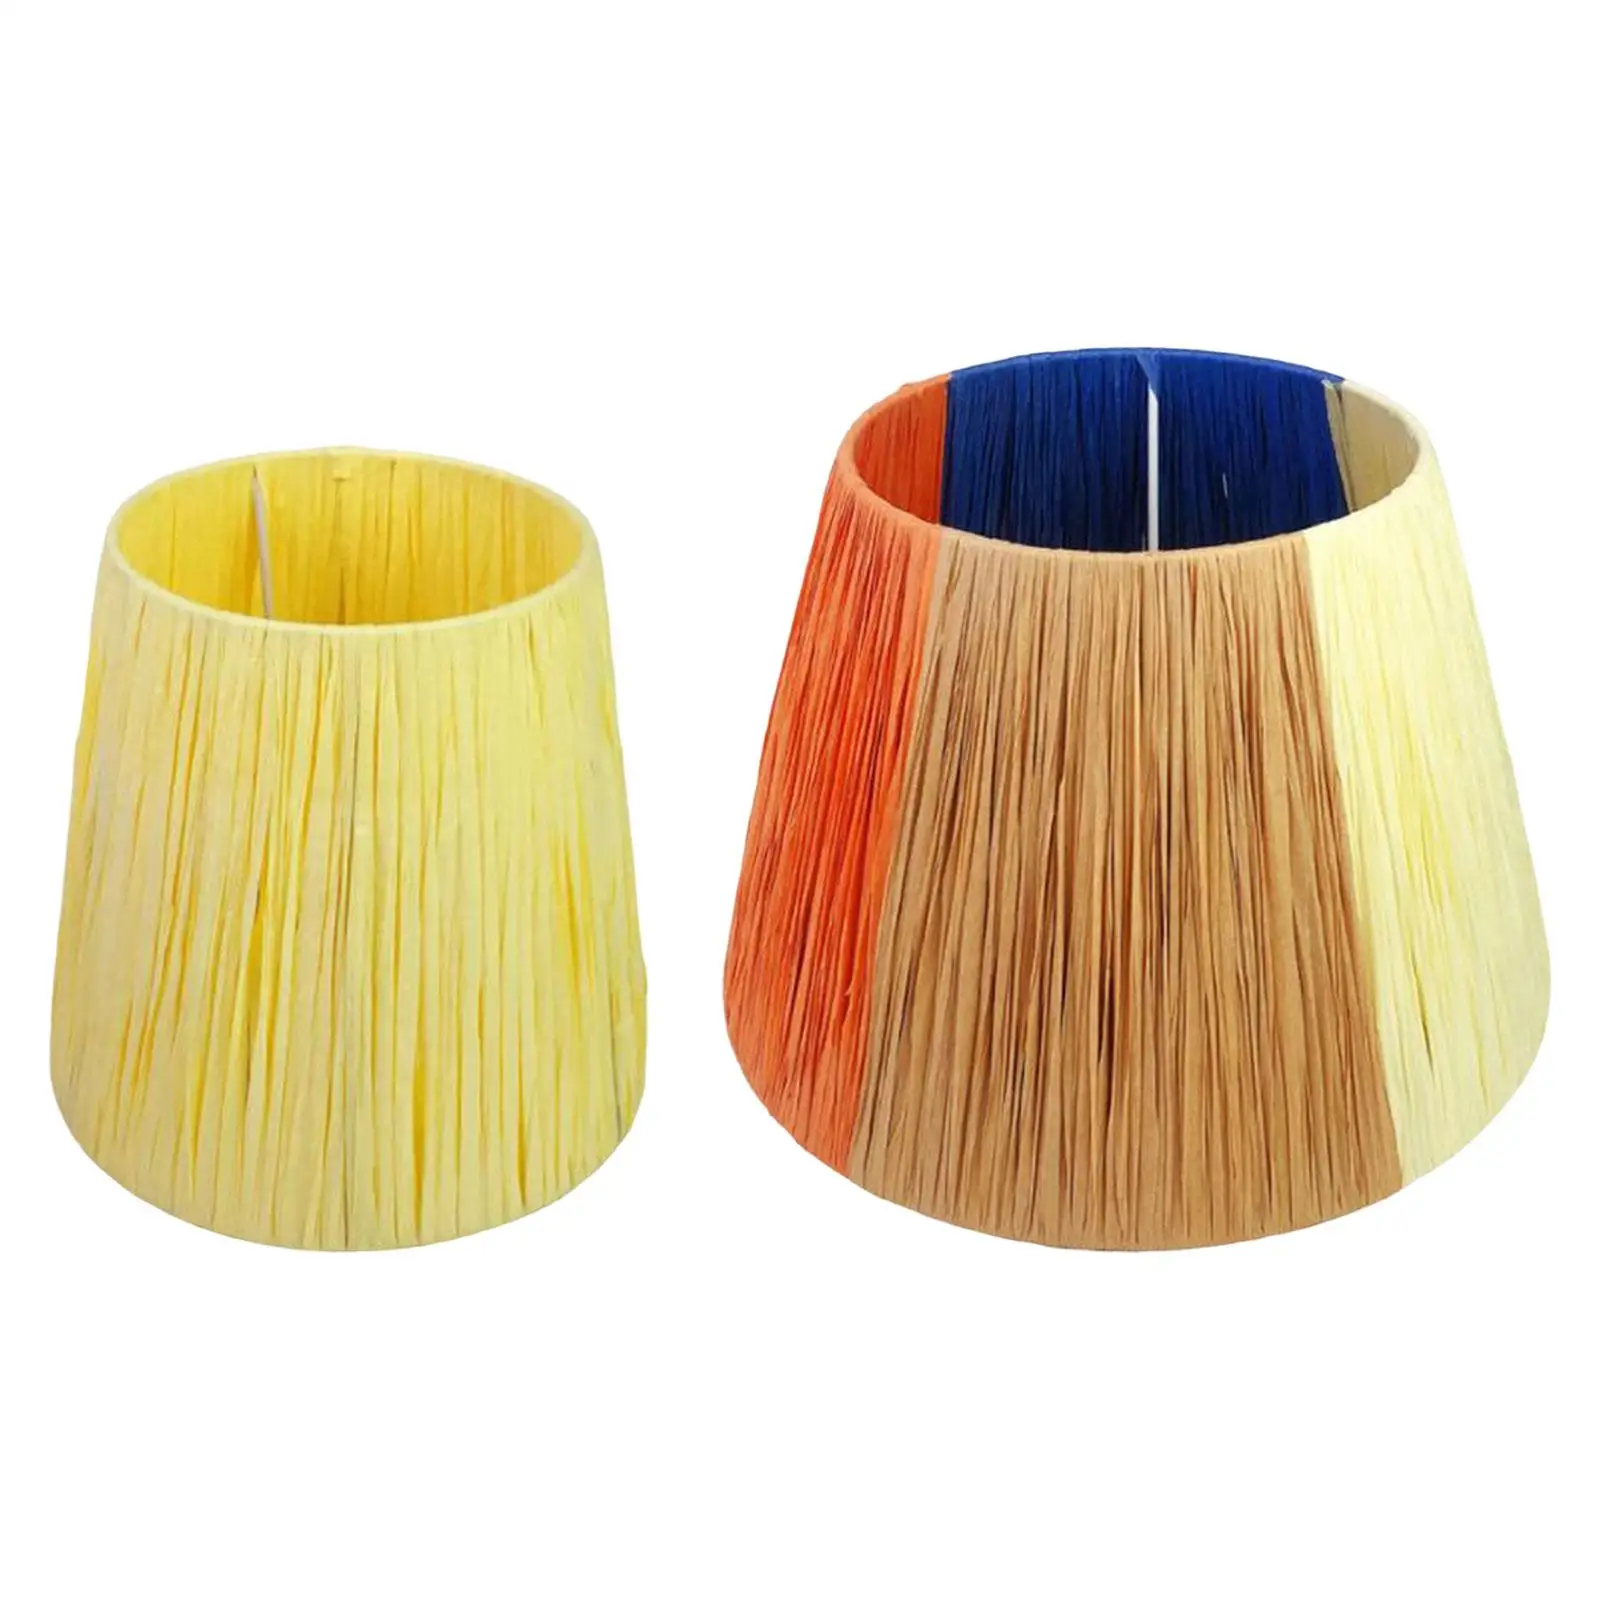 Table Lamp Shade Easy to Install Nordic Practical Light Fixture Shade Raffia Lampshade for Table Home Dorm Kitchen Dining Room